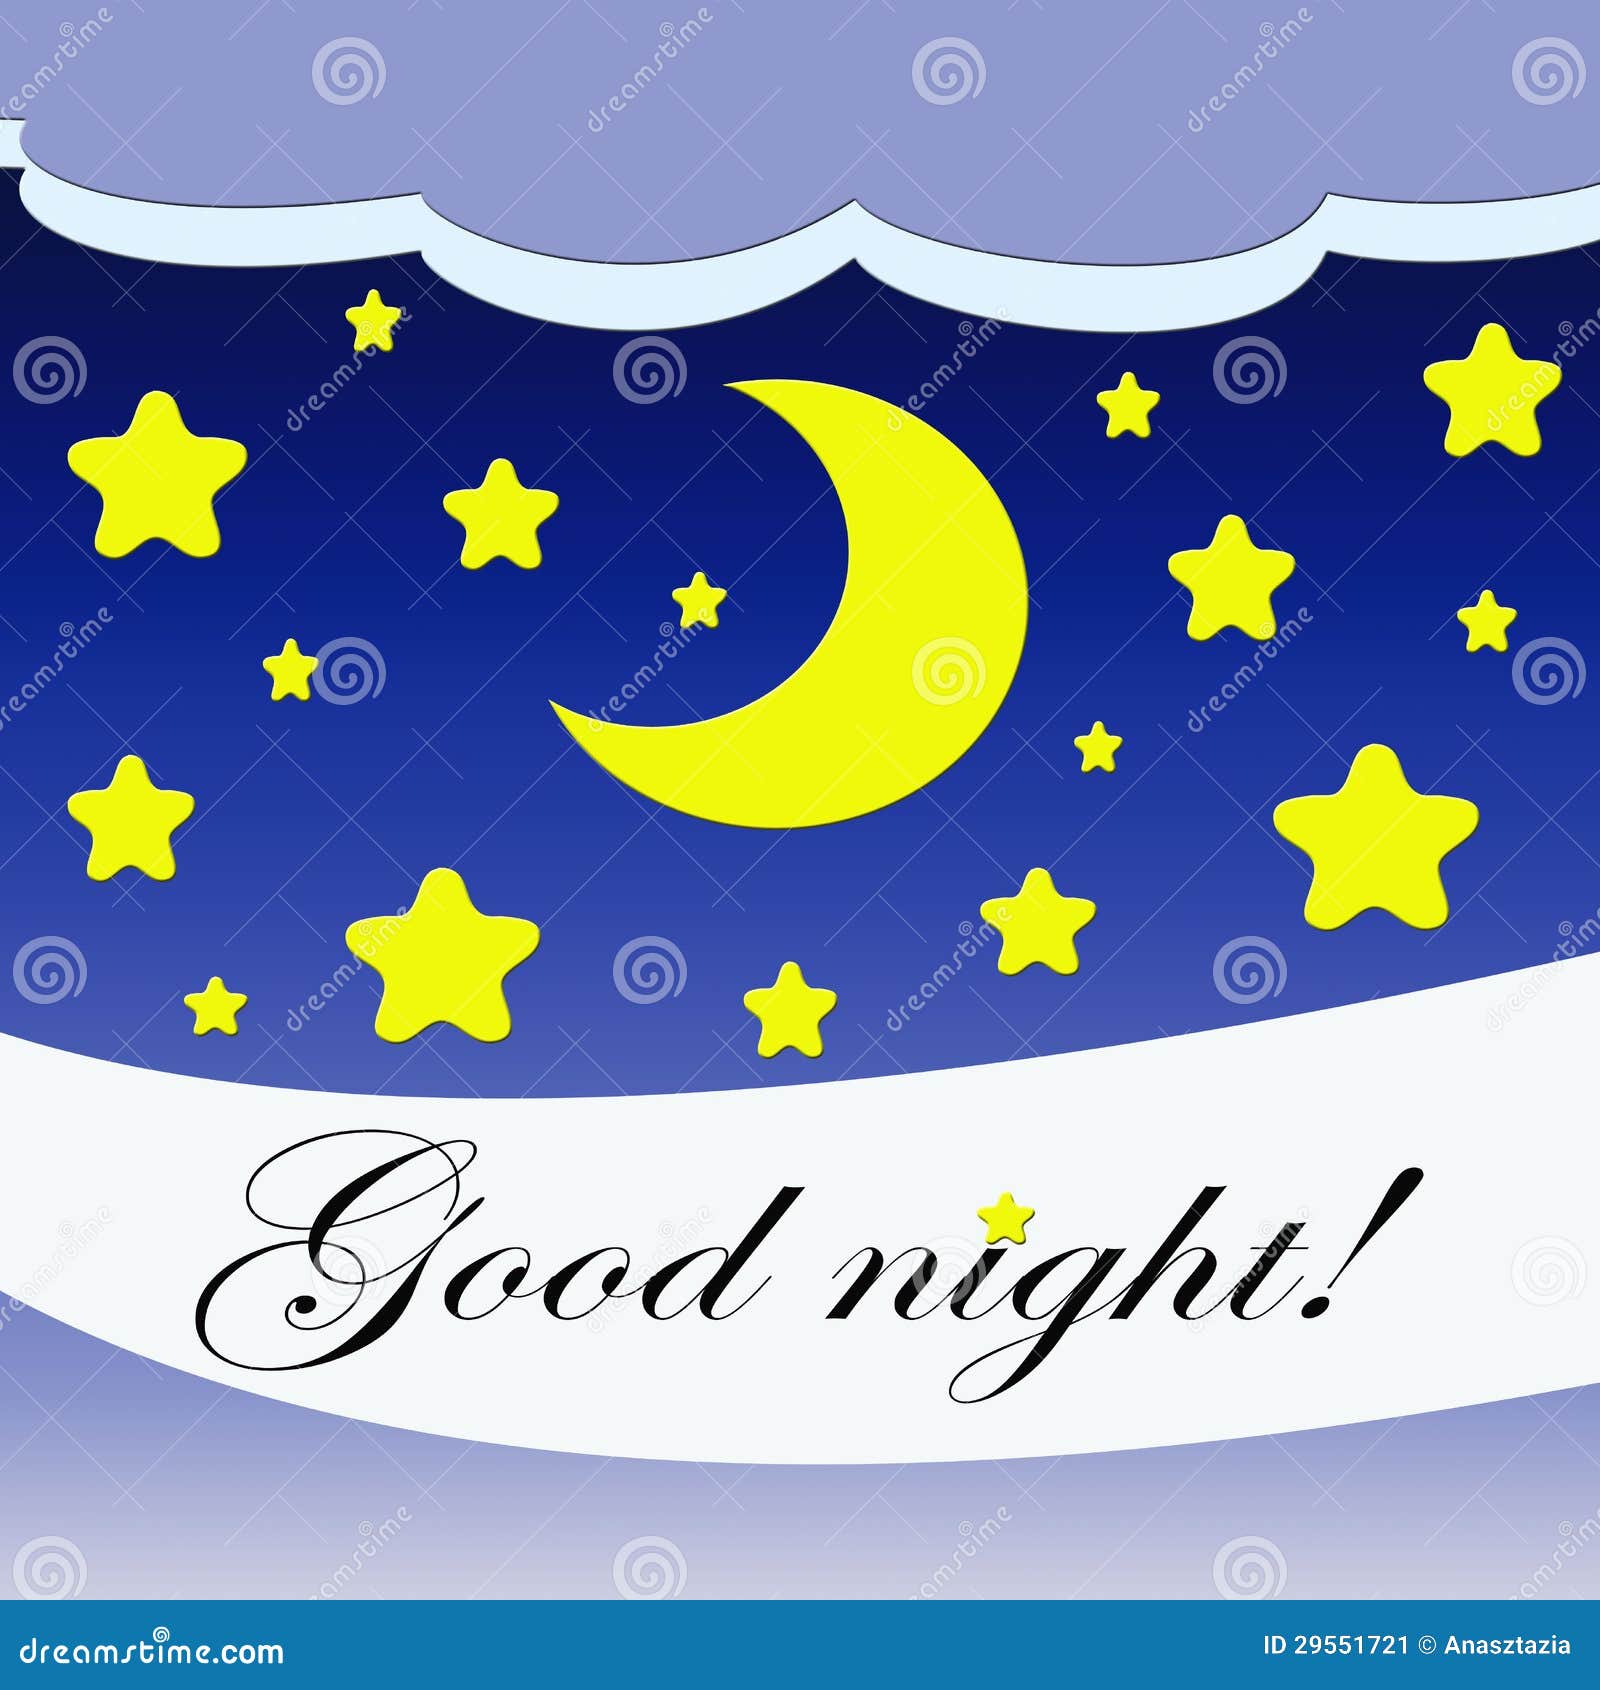 good night clipart free download - photo #25